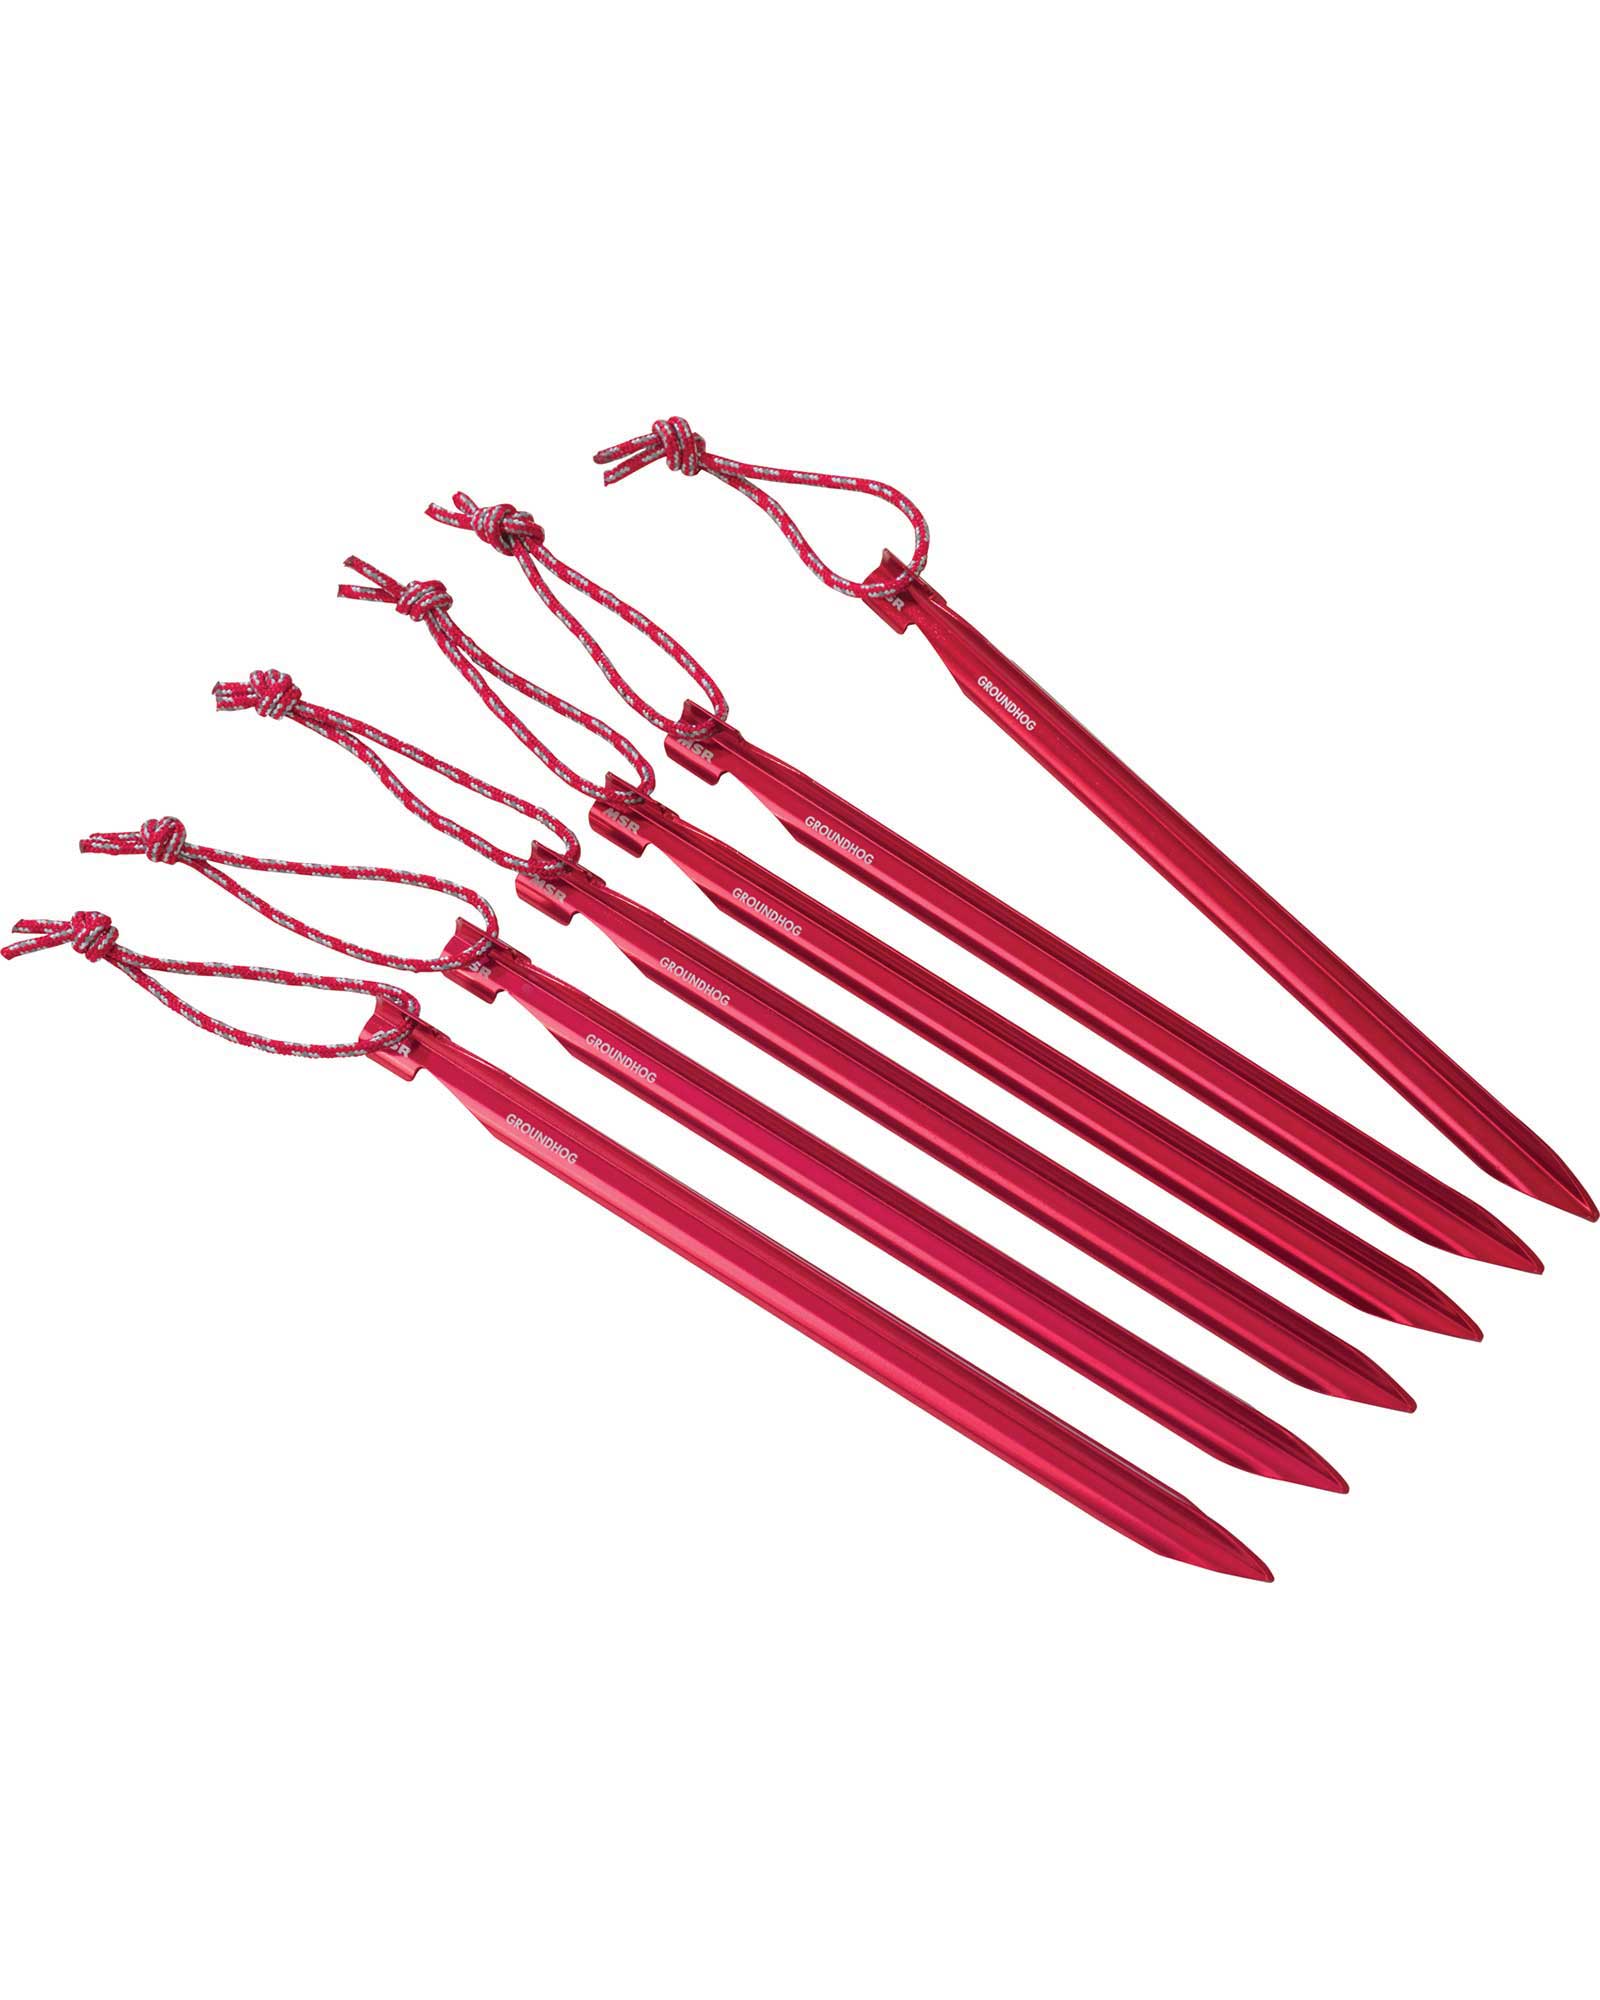 MSR Groundhog Tent Stakes   6pk - Red